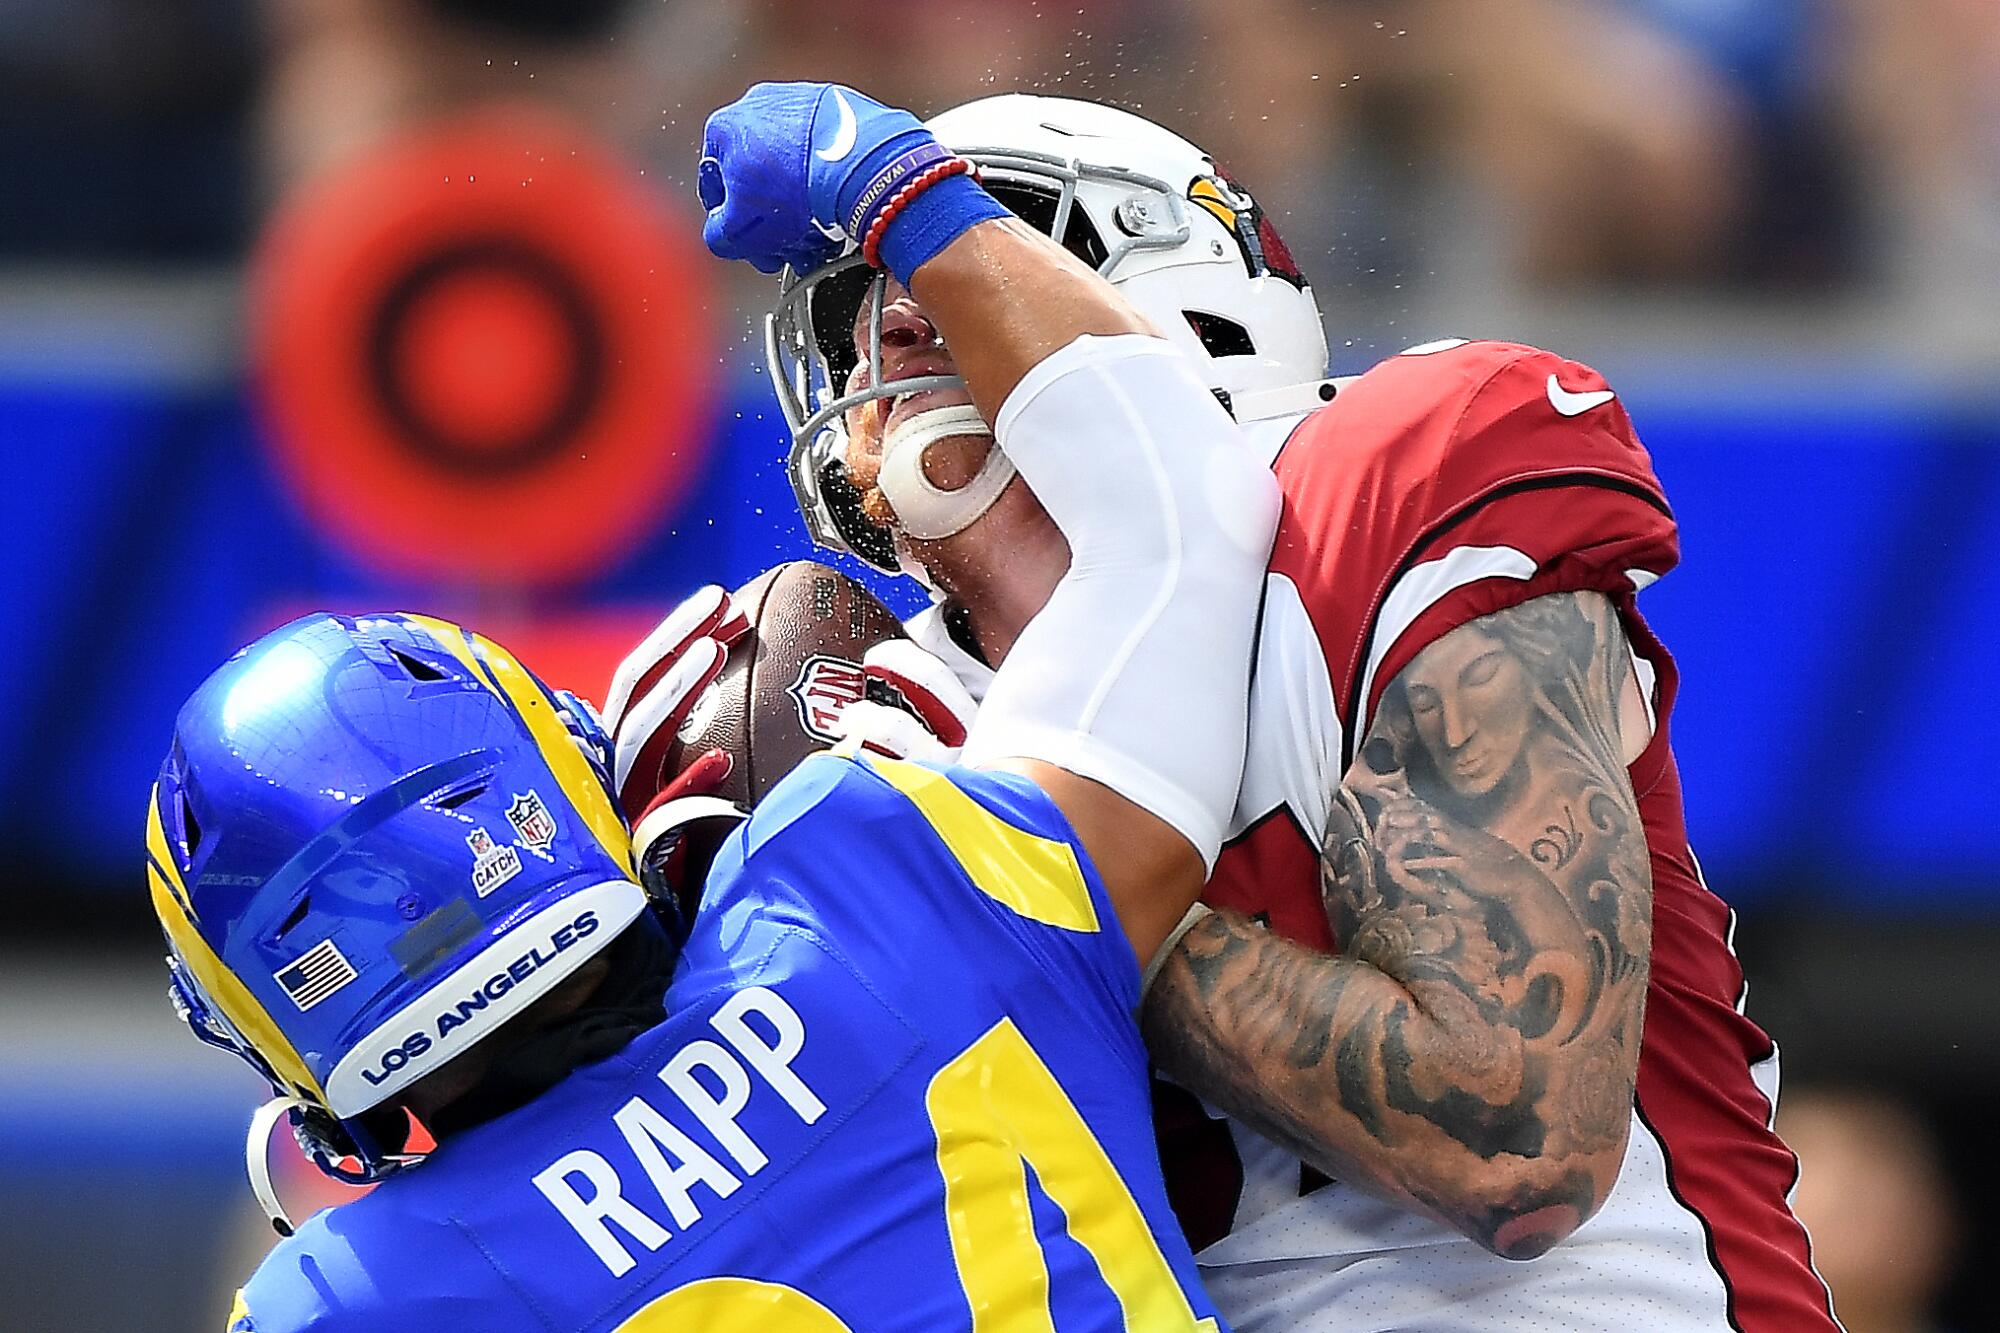 Cardinals tight end Maxi Williams gets hit in the face by Rams safety Taylor Rapp while catching a touchdown pass.